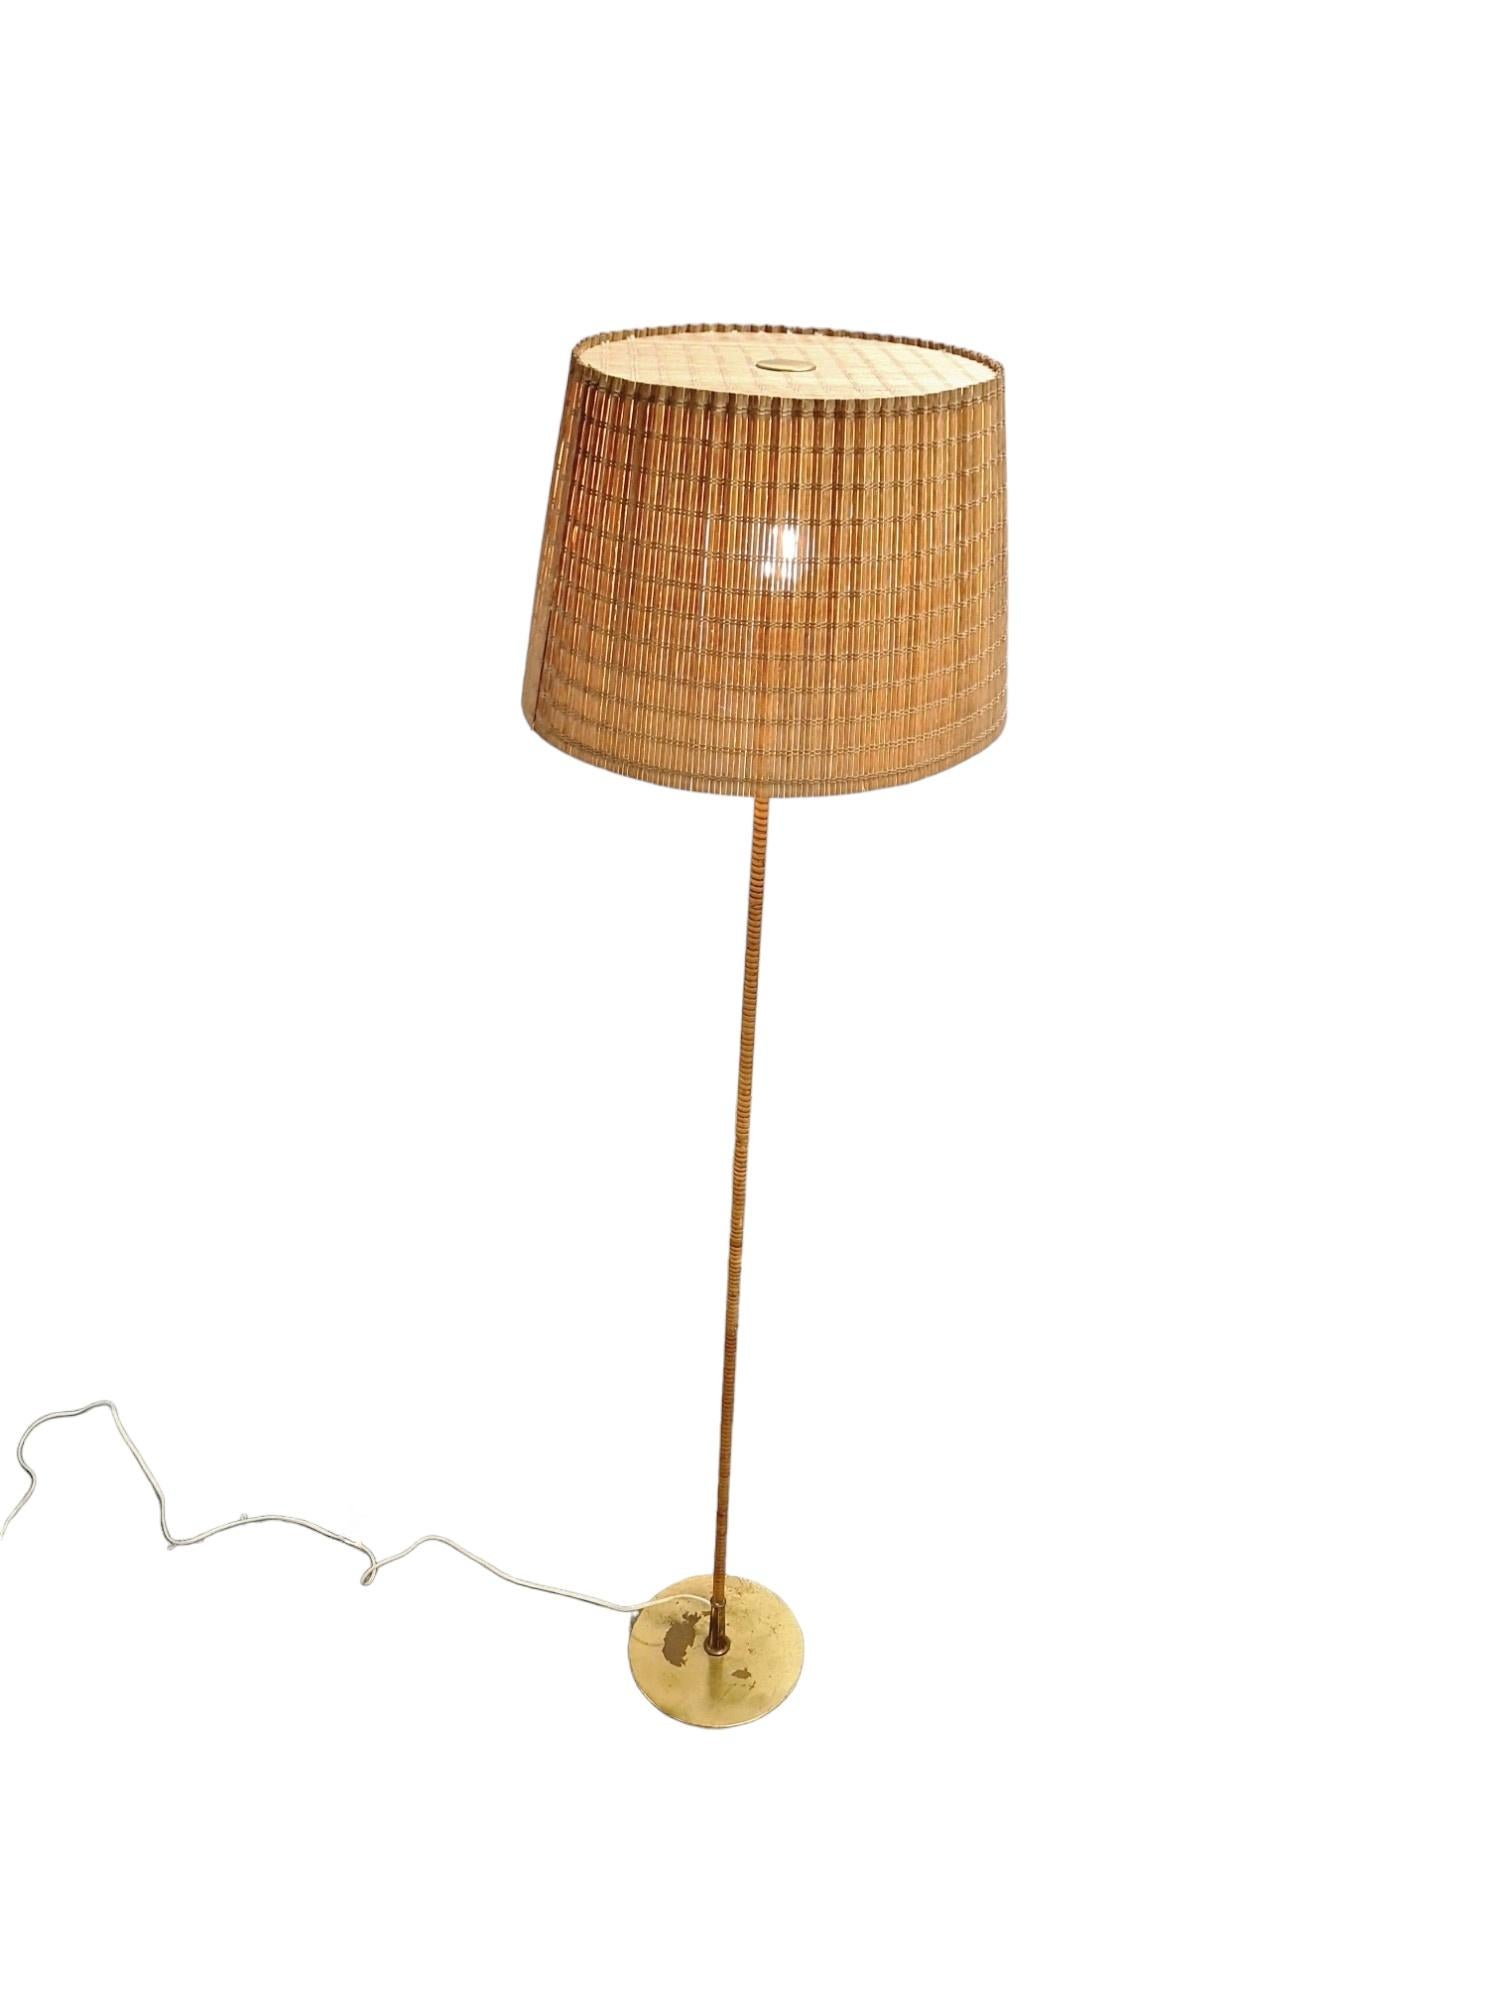 Lampadaire Paavo Tynell modèle 9627, Taito Oy  en vente 3